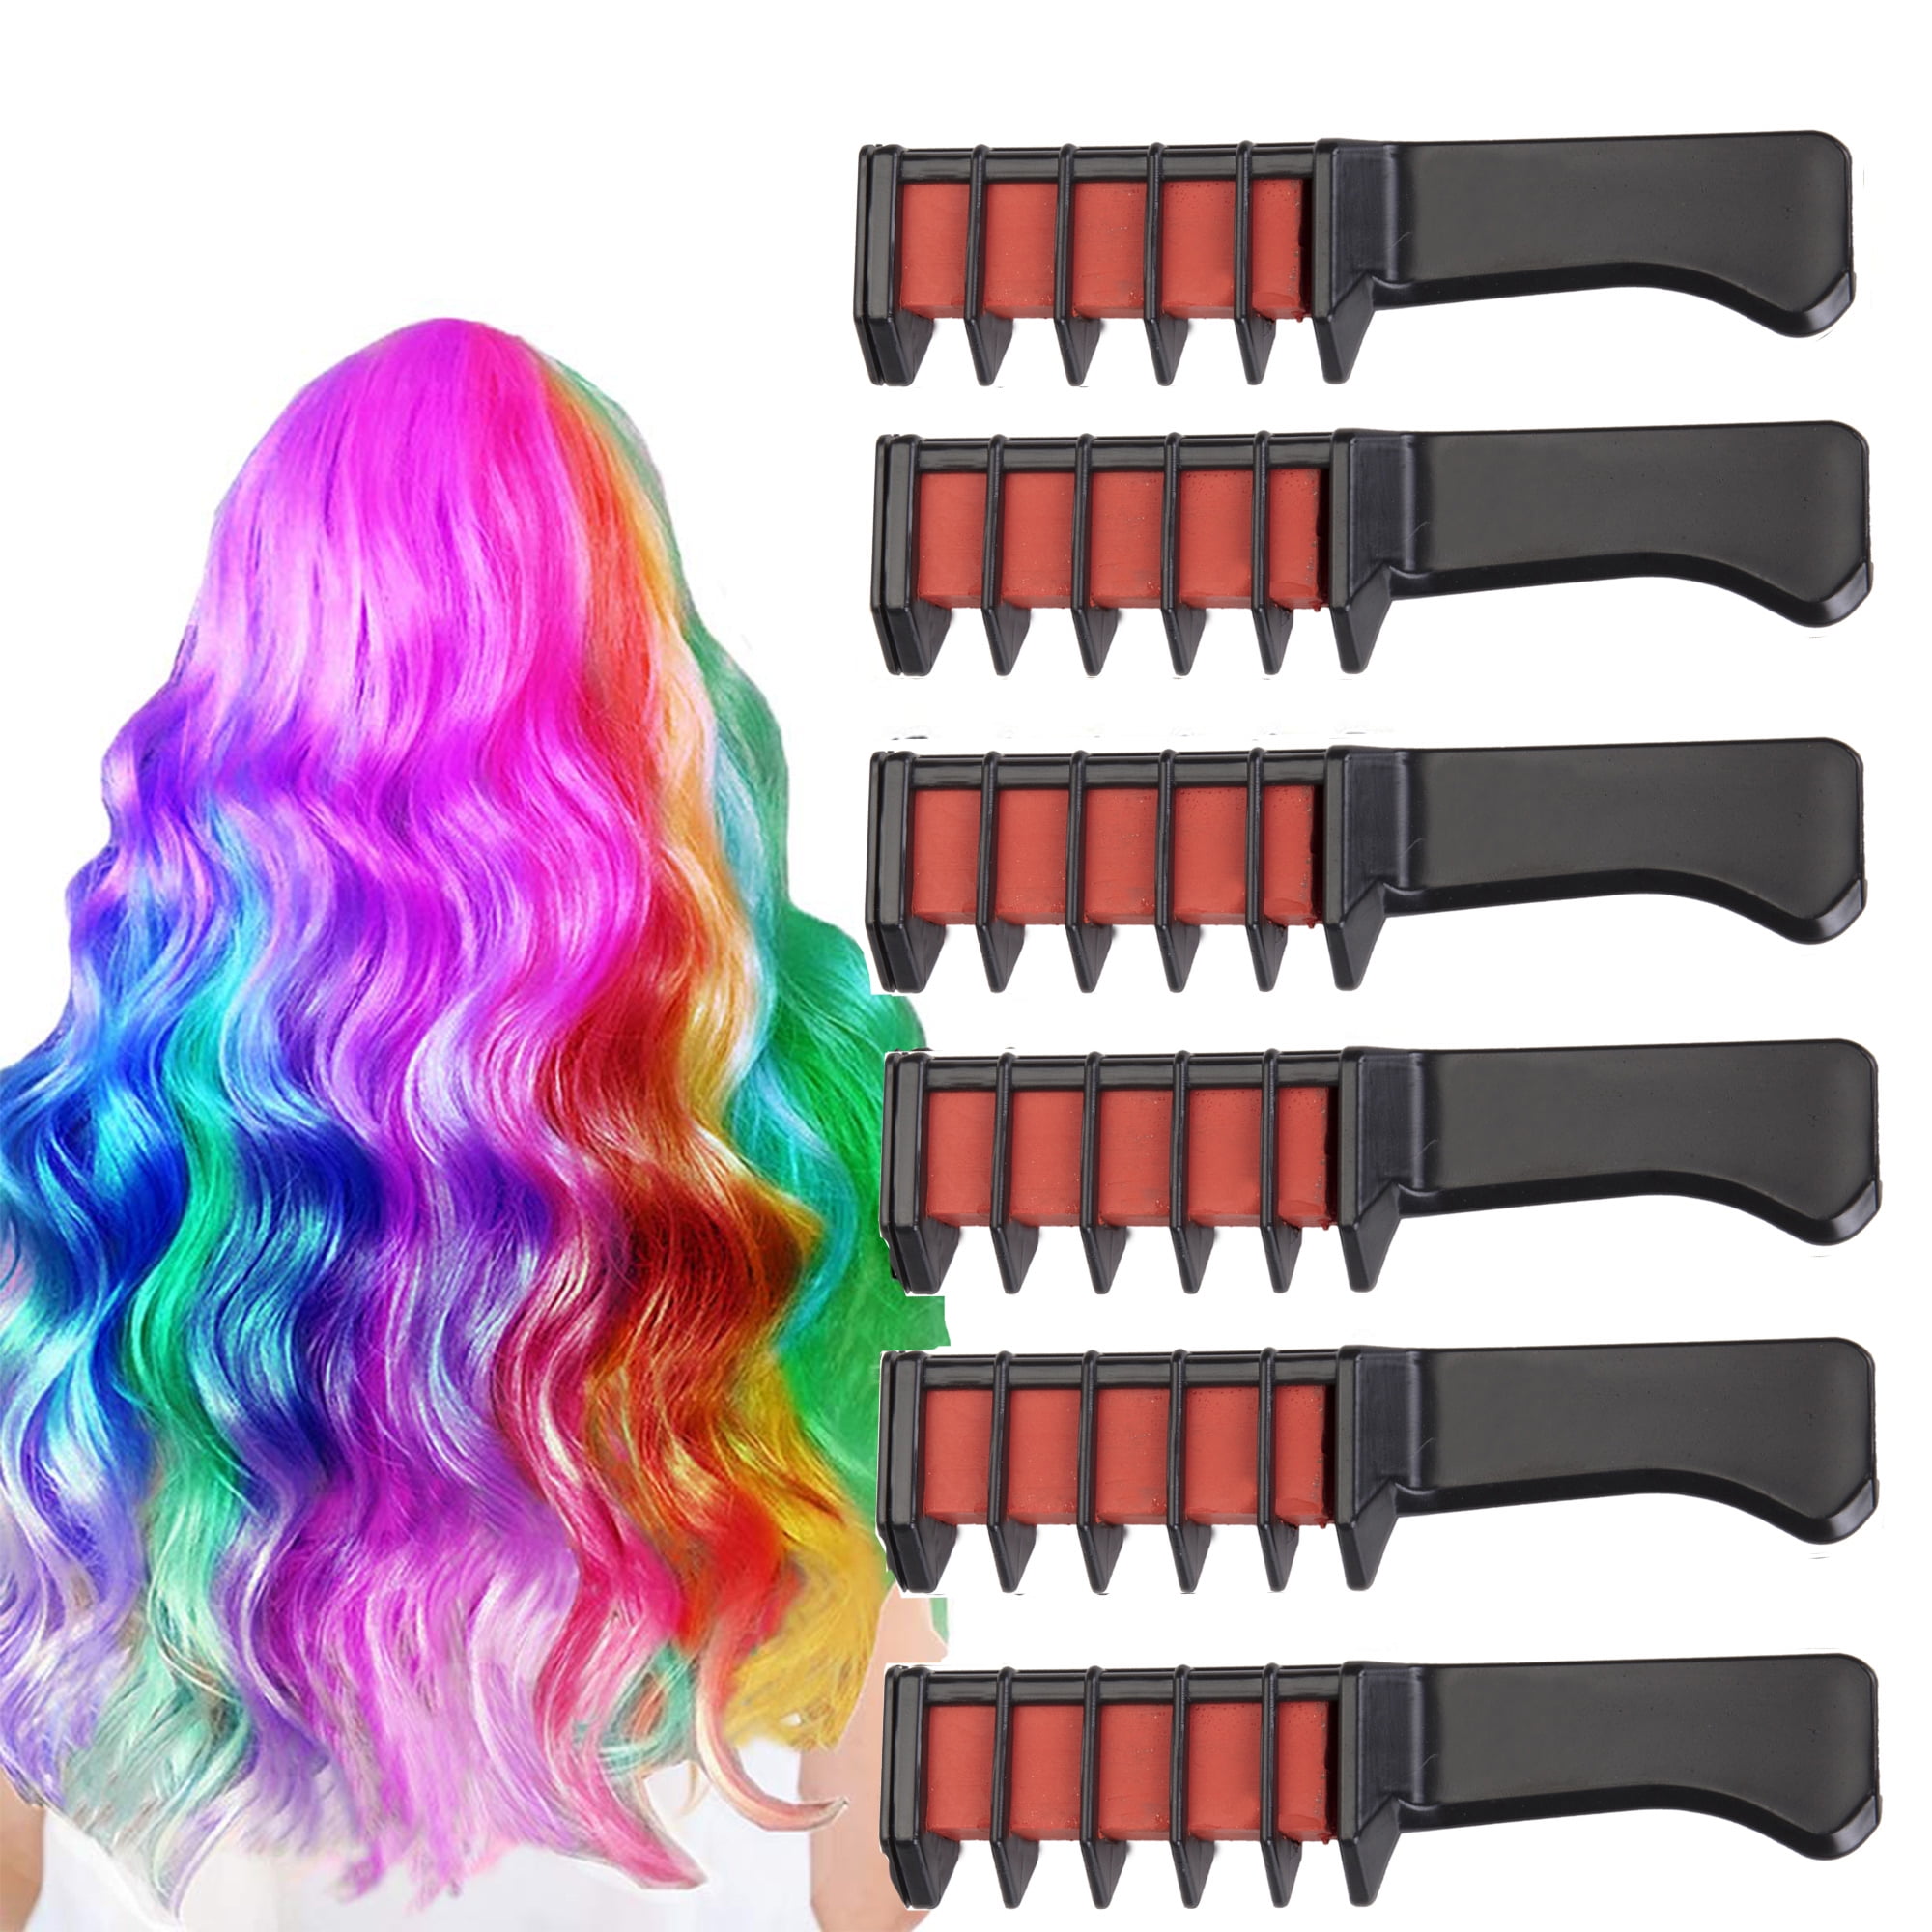 Temporary Color Hair Chalk for Girls,Temporary Bright Washable Color for  Kids, Hair Chalk Comb , Hair Chalk Salon Gift for Girls Age 4 5 6 7 8 9 10+  Set of 6 